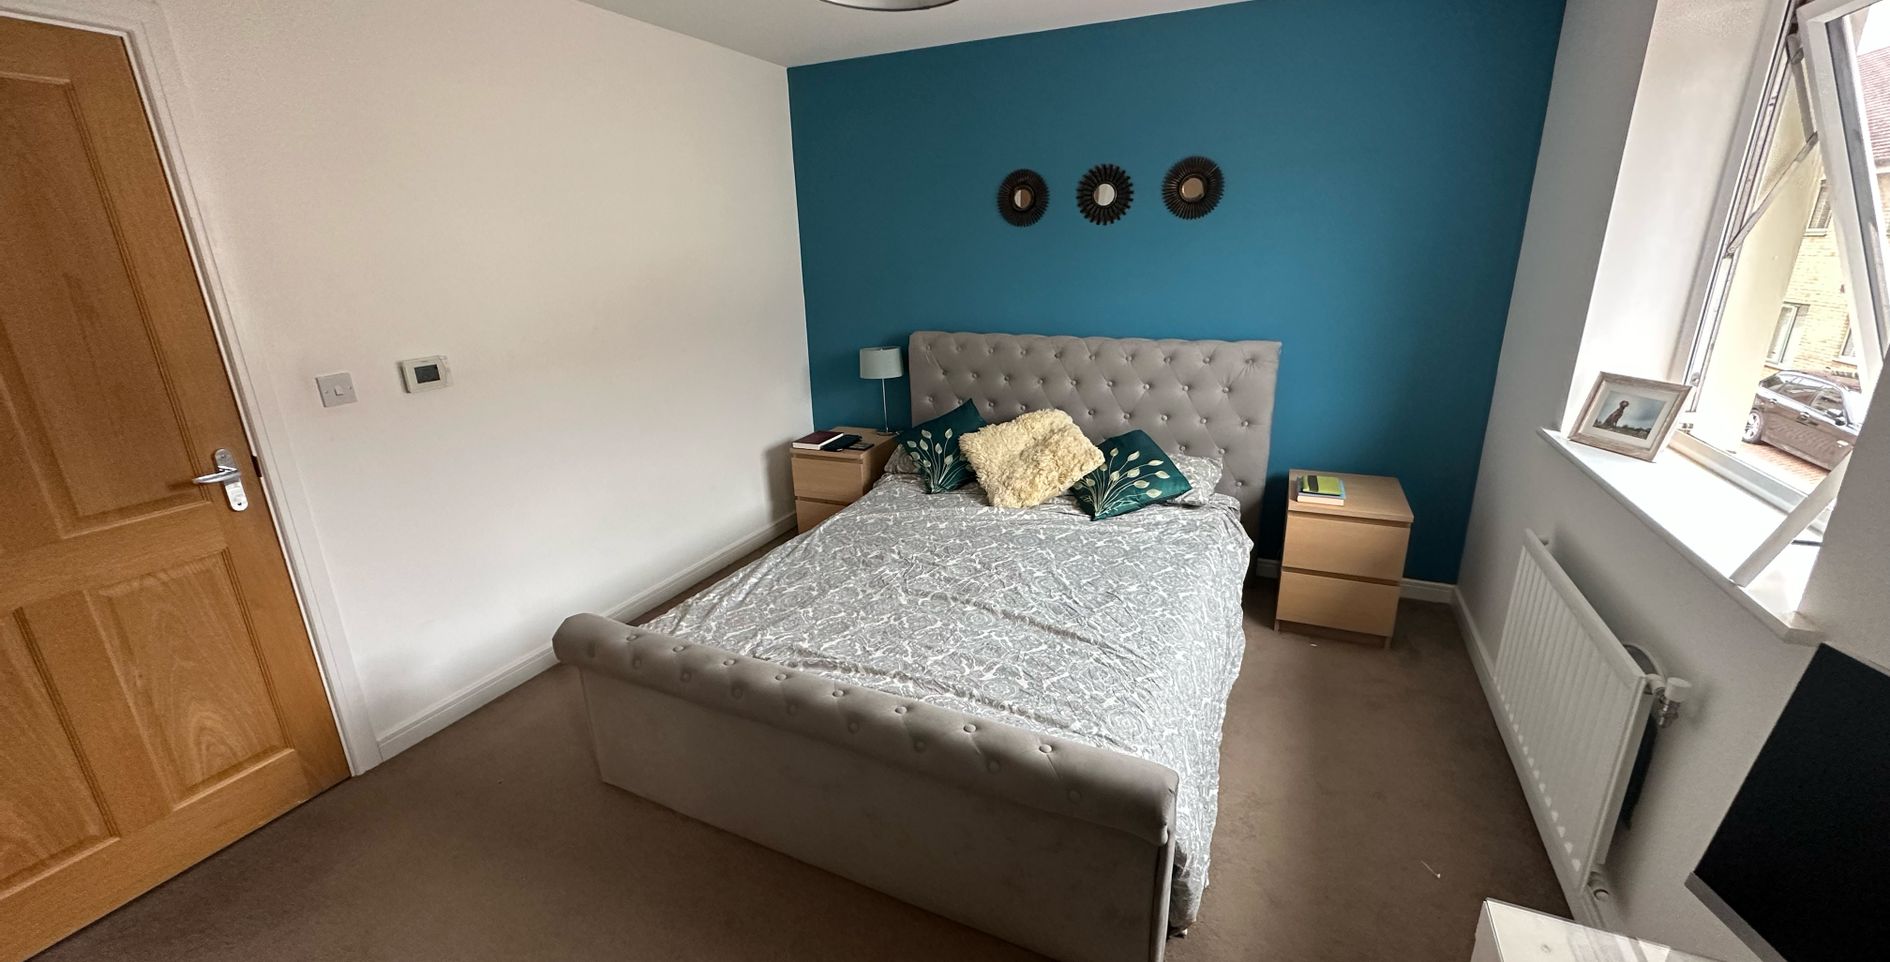 CM3 3FG – 2 bedroom house in Chelmsford – Share to Buy